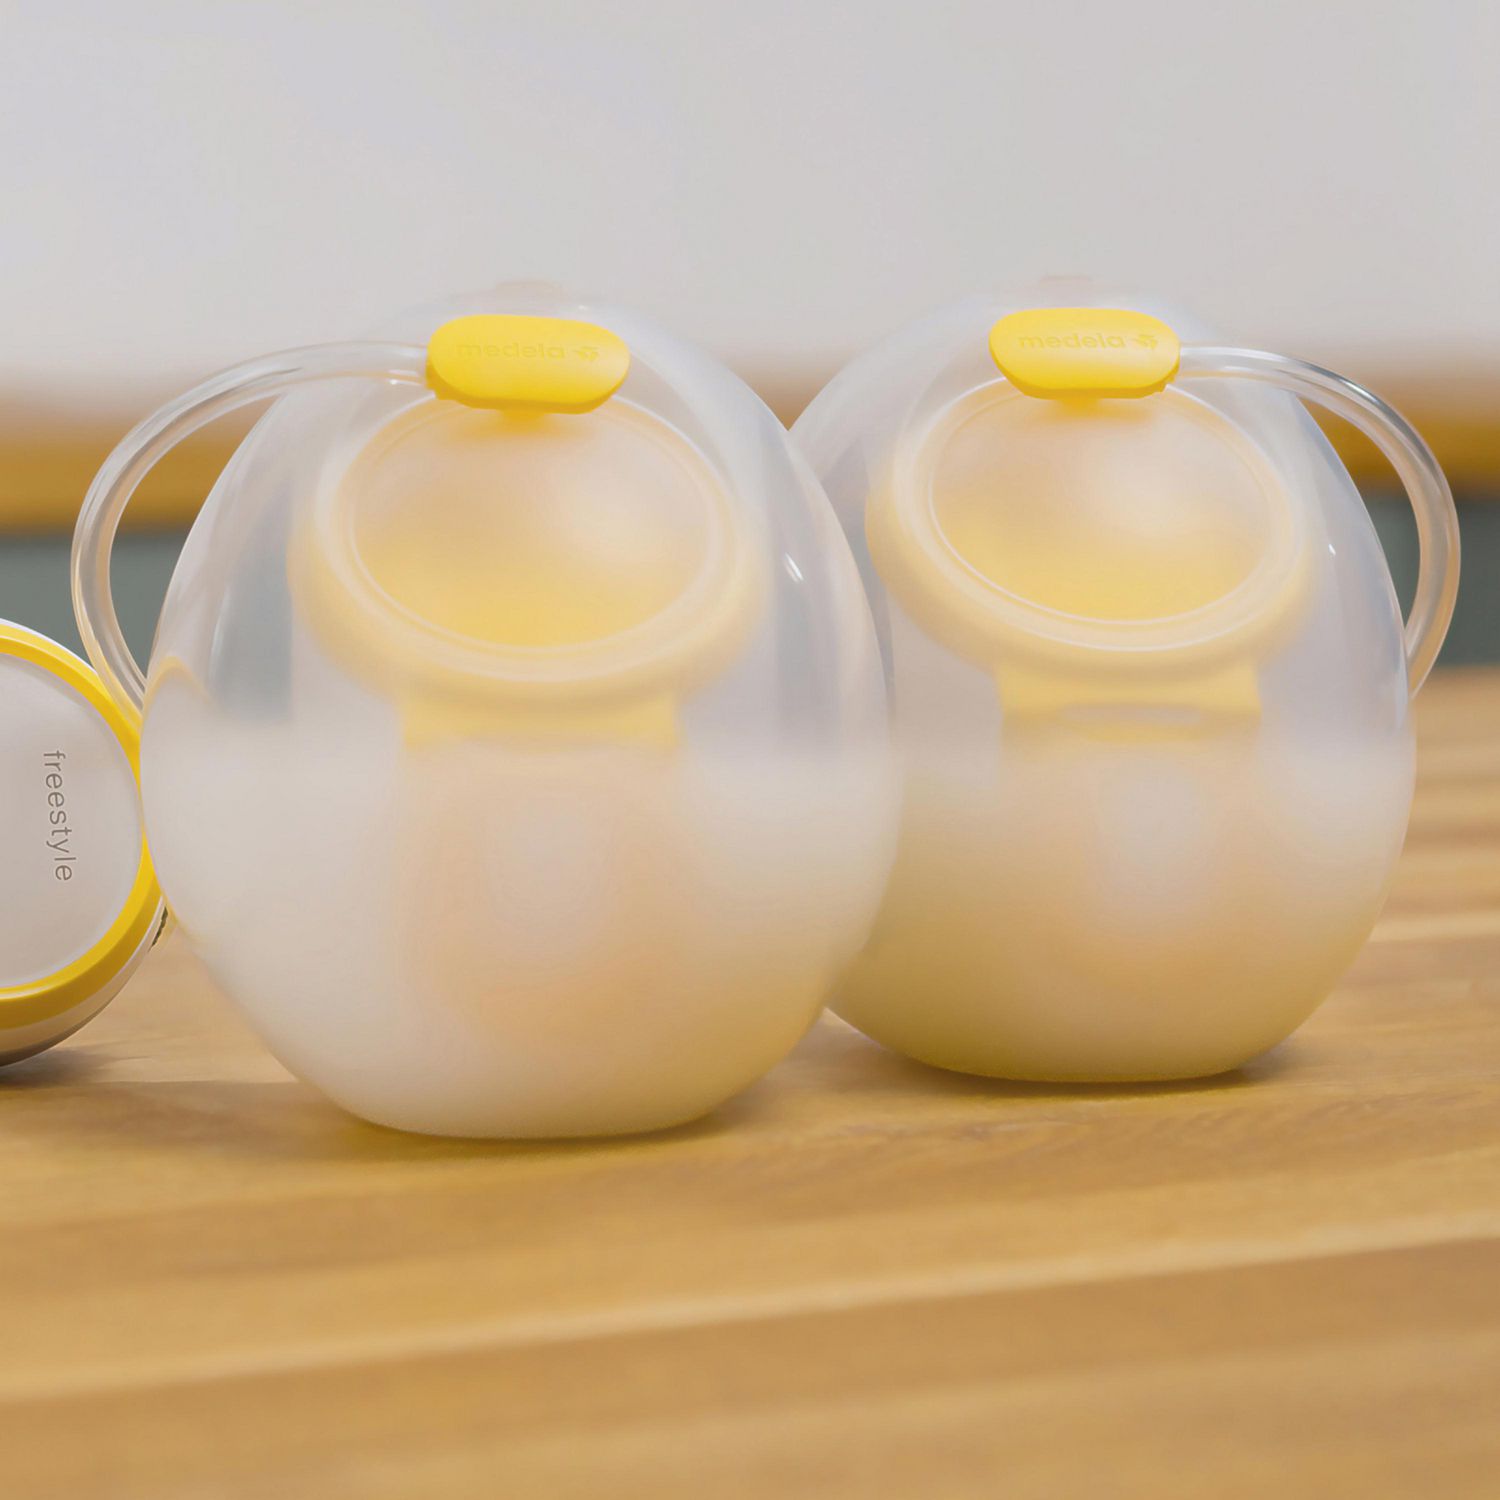 Medela Freestyle Hands-Free Breast Pump  Wearable, Portable and Discreet Double  Electric Breast Pump with App Connectivity 